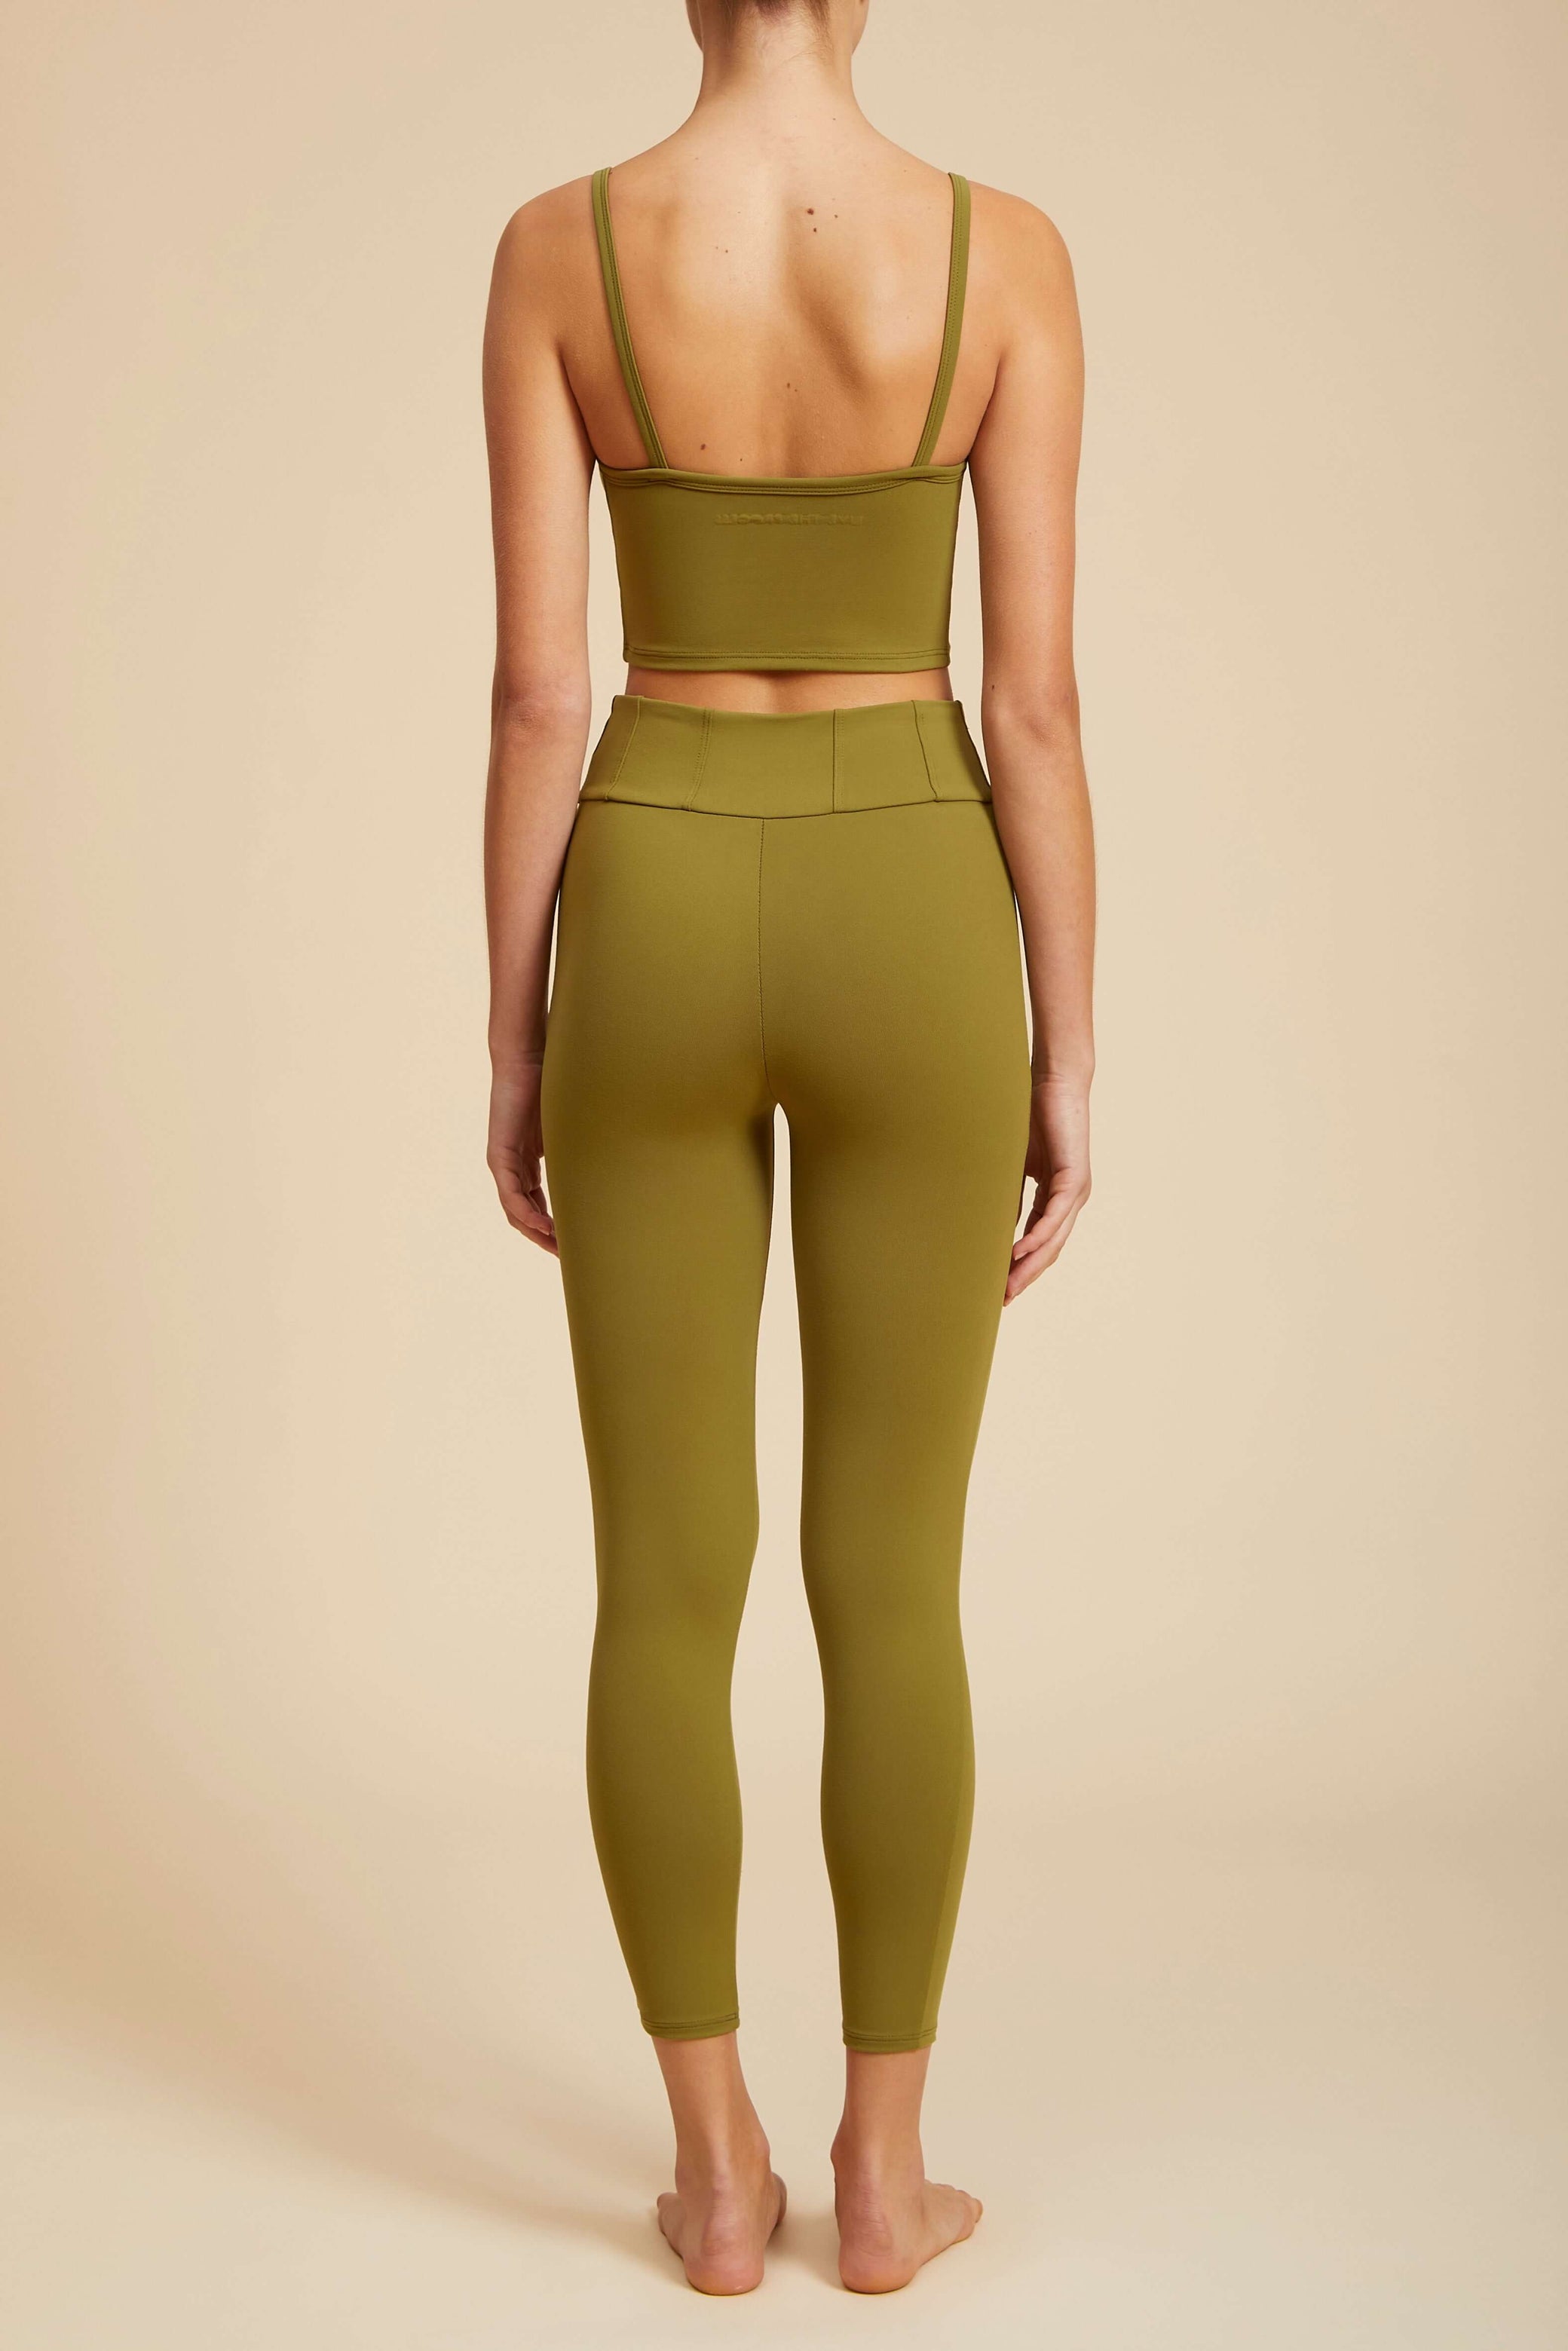 Nothing seems more comfortable than a pair of Prisma's #leggings